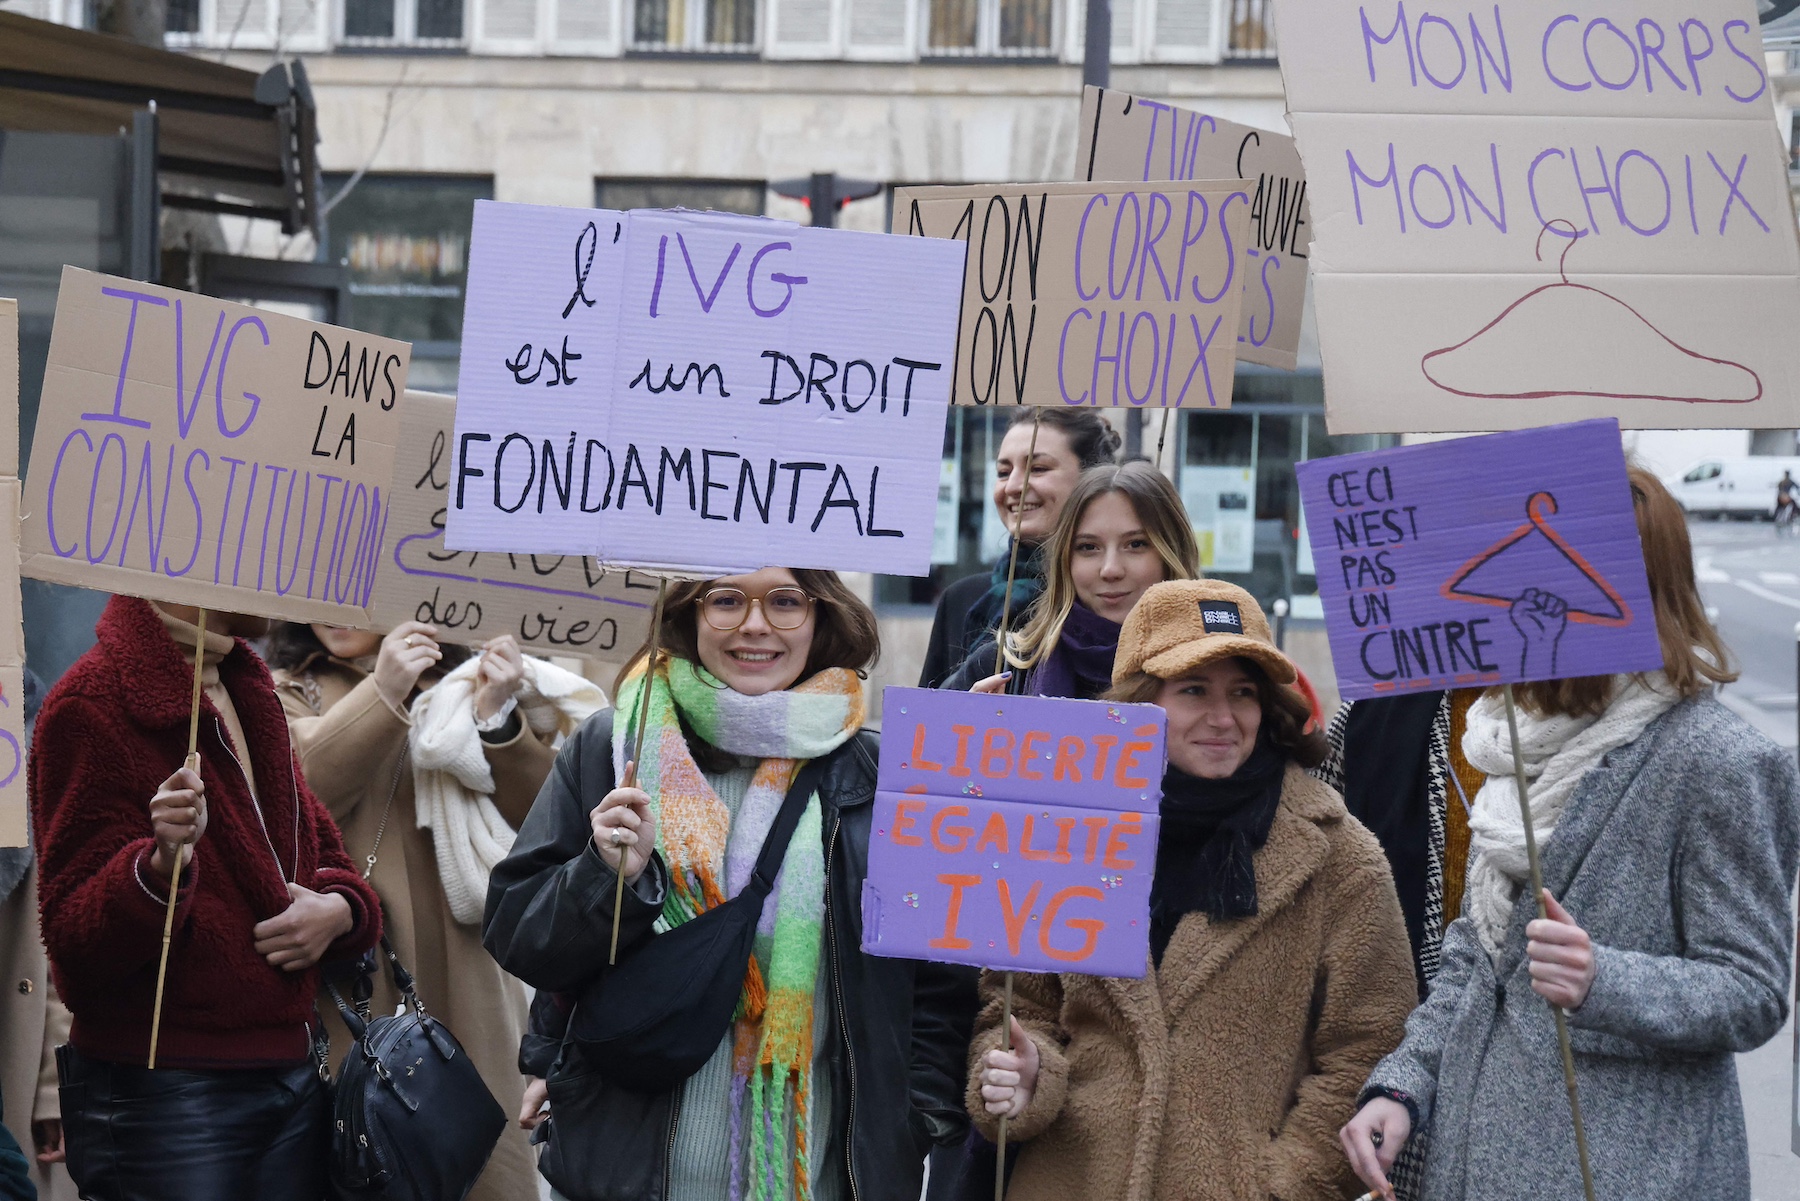 France Has Become The First Country To Make Abortion A Constitutional Right